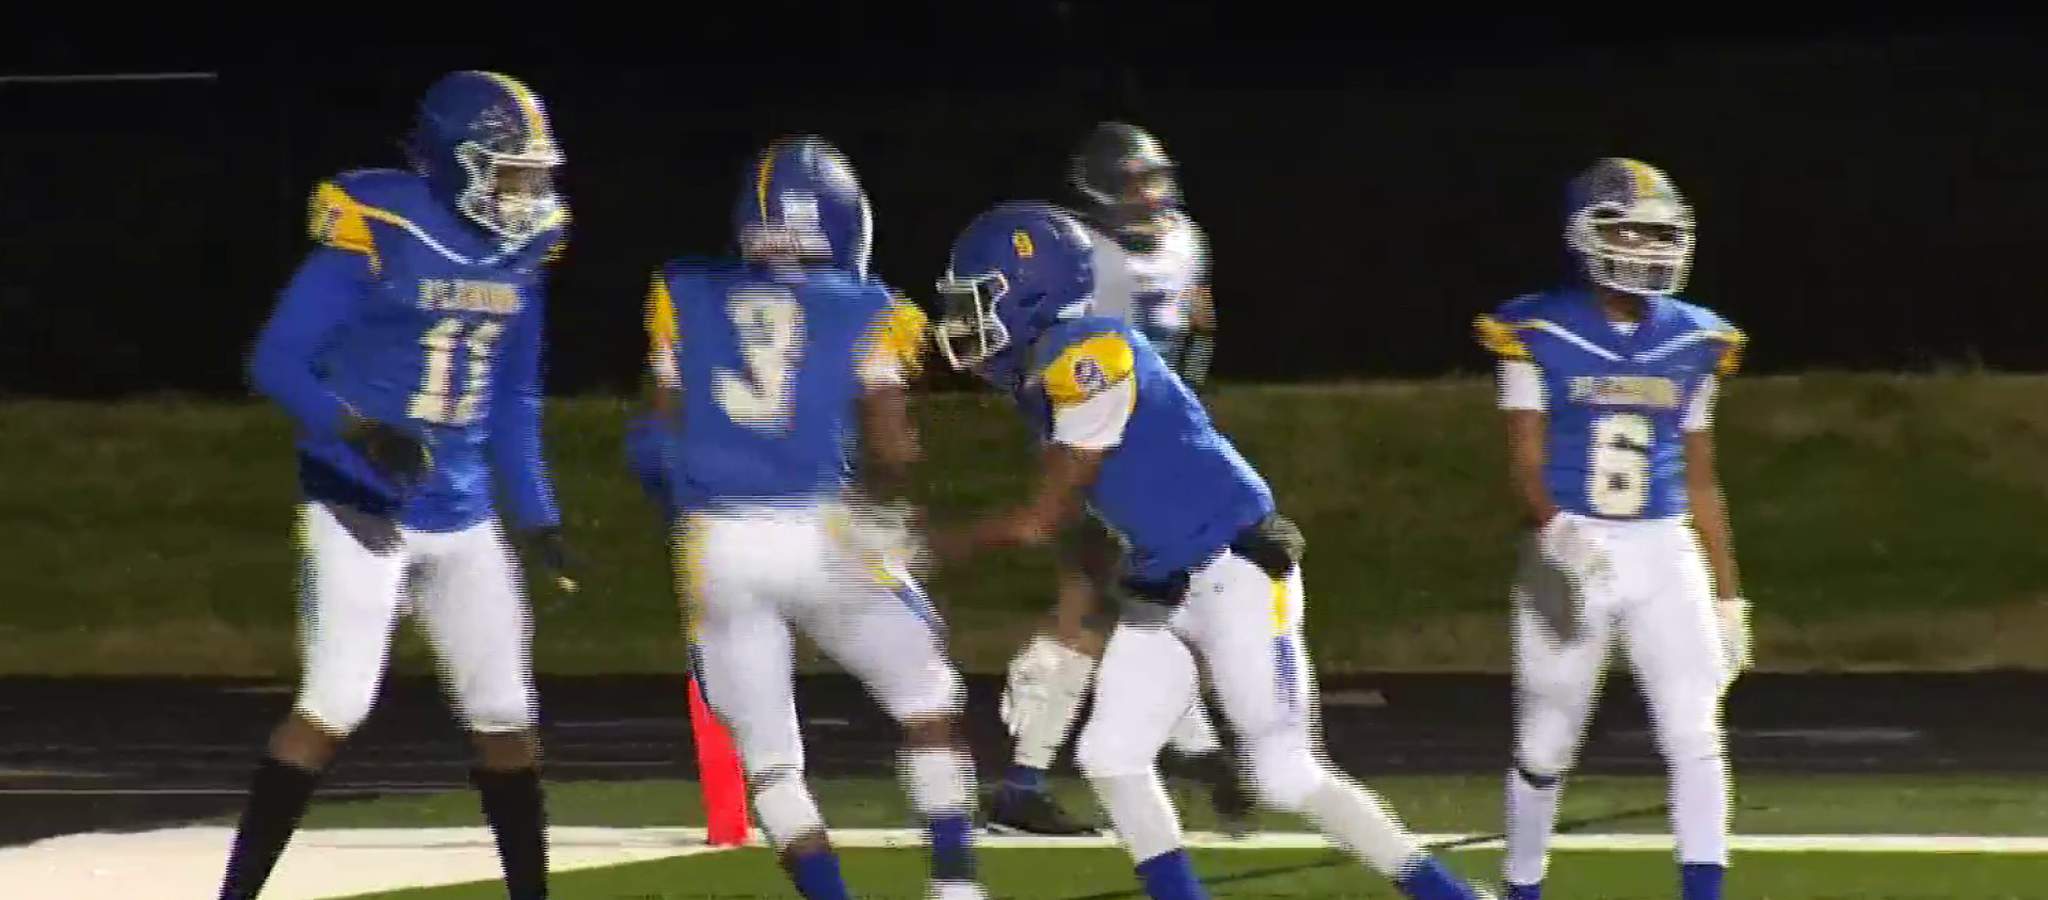 William Fleming blanked Spotswood in 34-0 win